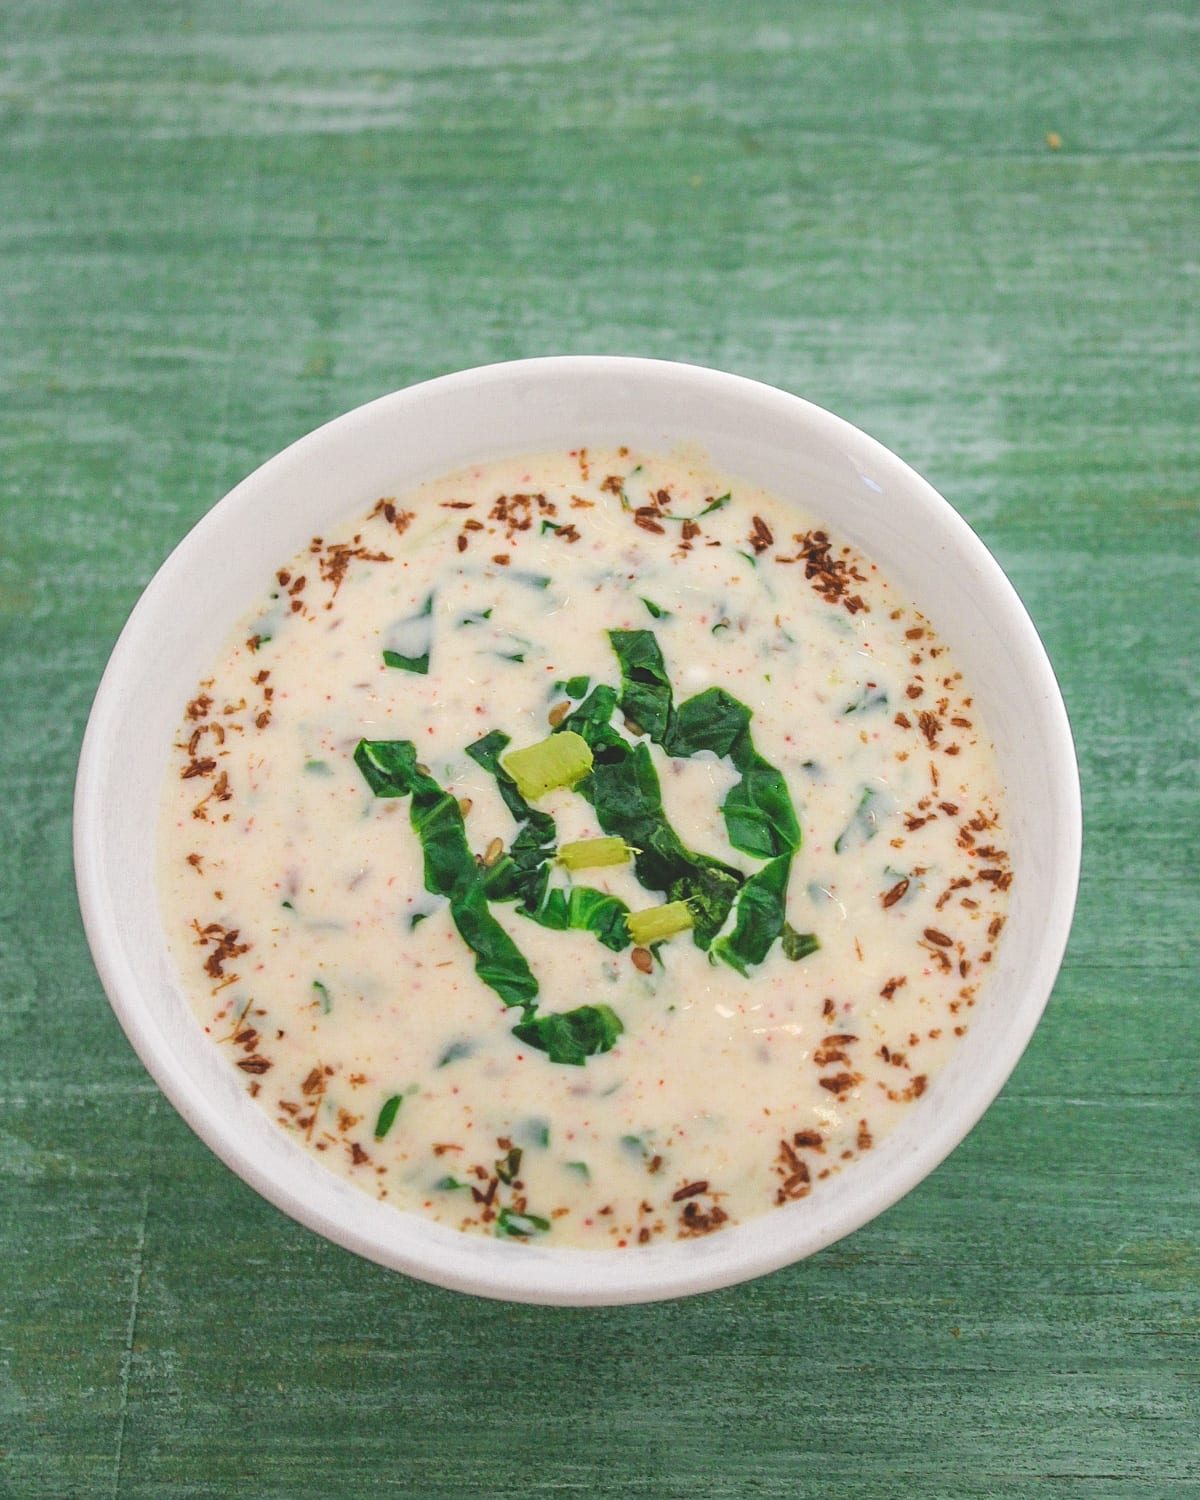 Spinach raita garnished with some cooked spinach and cumin powder.